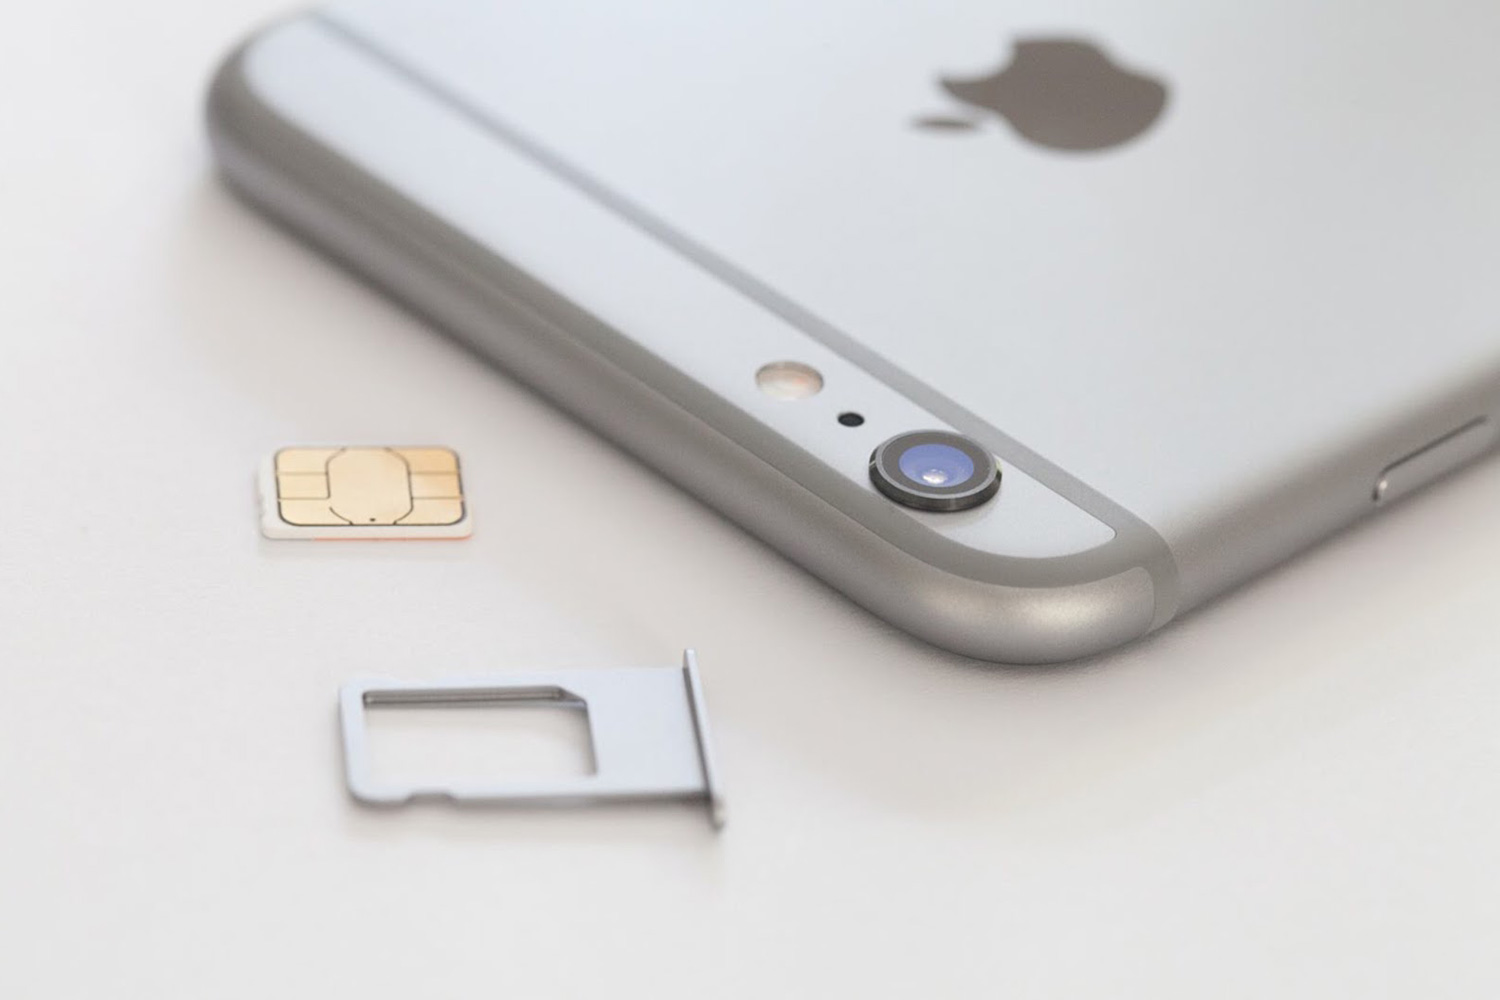 A close up of the iPhone 7 sim card slot.